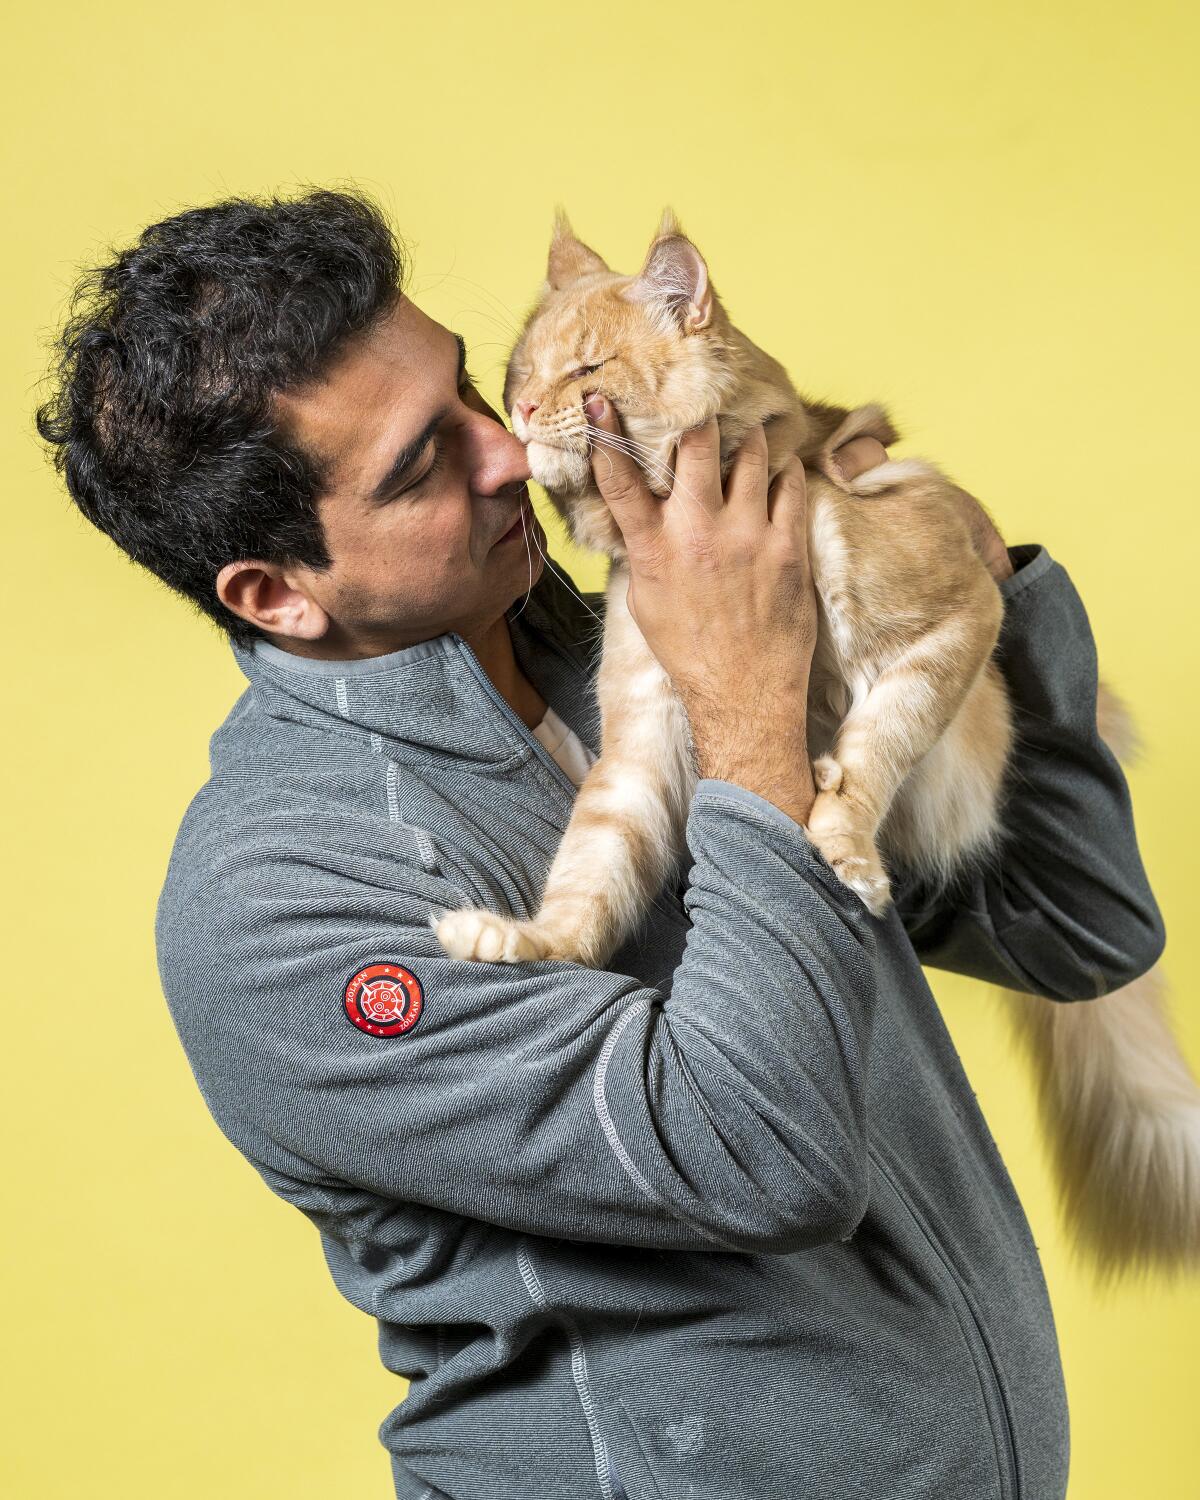 Mariano Cane holds his Maine Coon named Evsei.